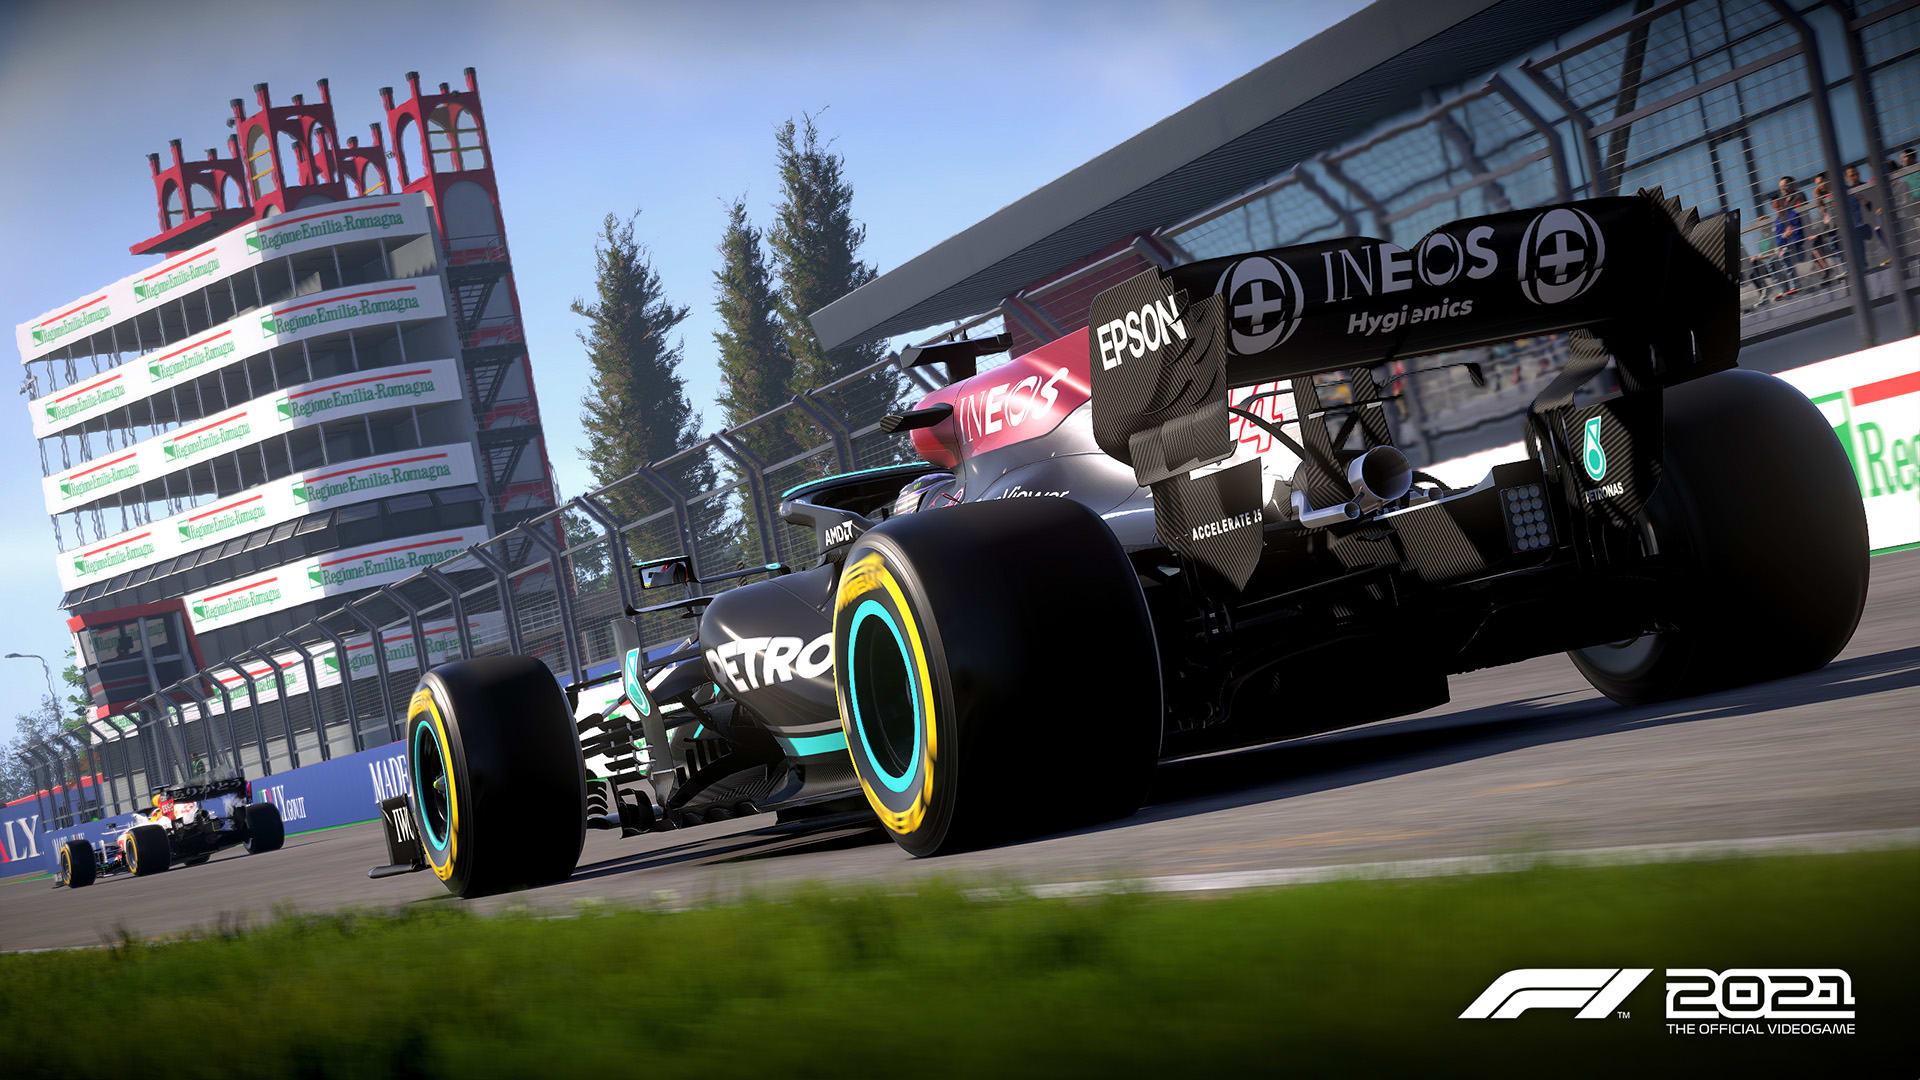 F1 2021 game adds Imola and Red Bulls Honda tribute livery in latest update Formula 1®